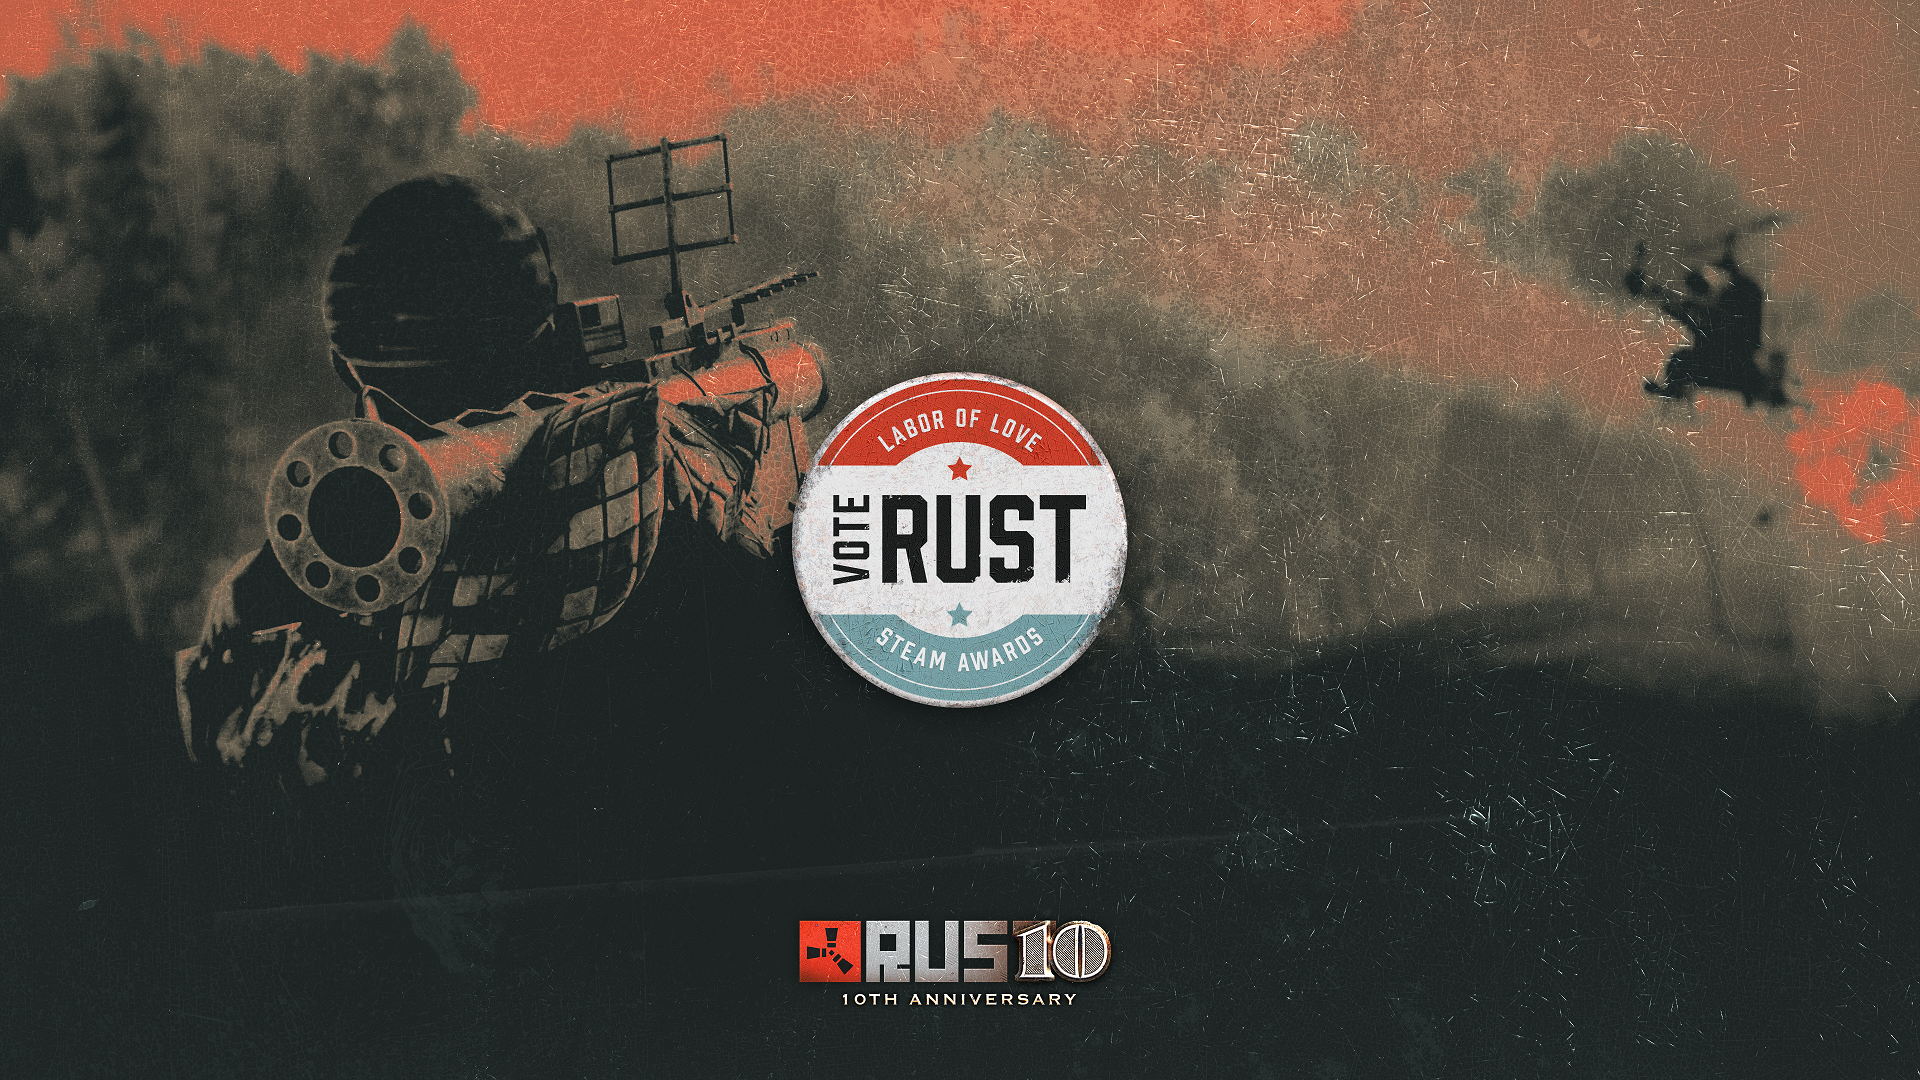 Rust Rustopia Invitational charity tournament: Schedule, format, live  stream details, and more